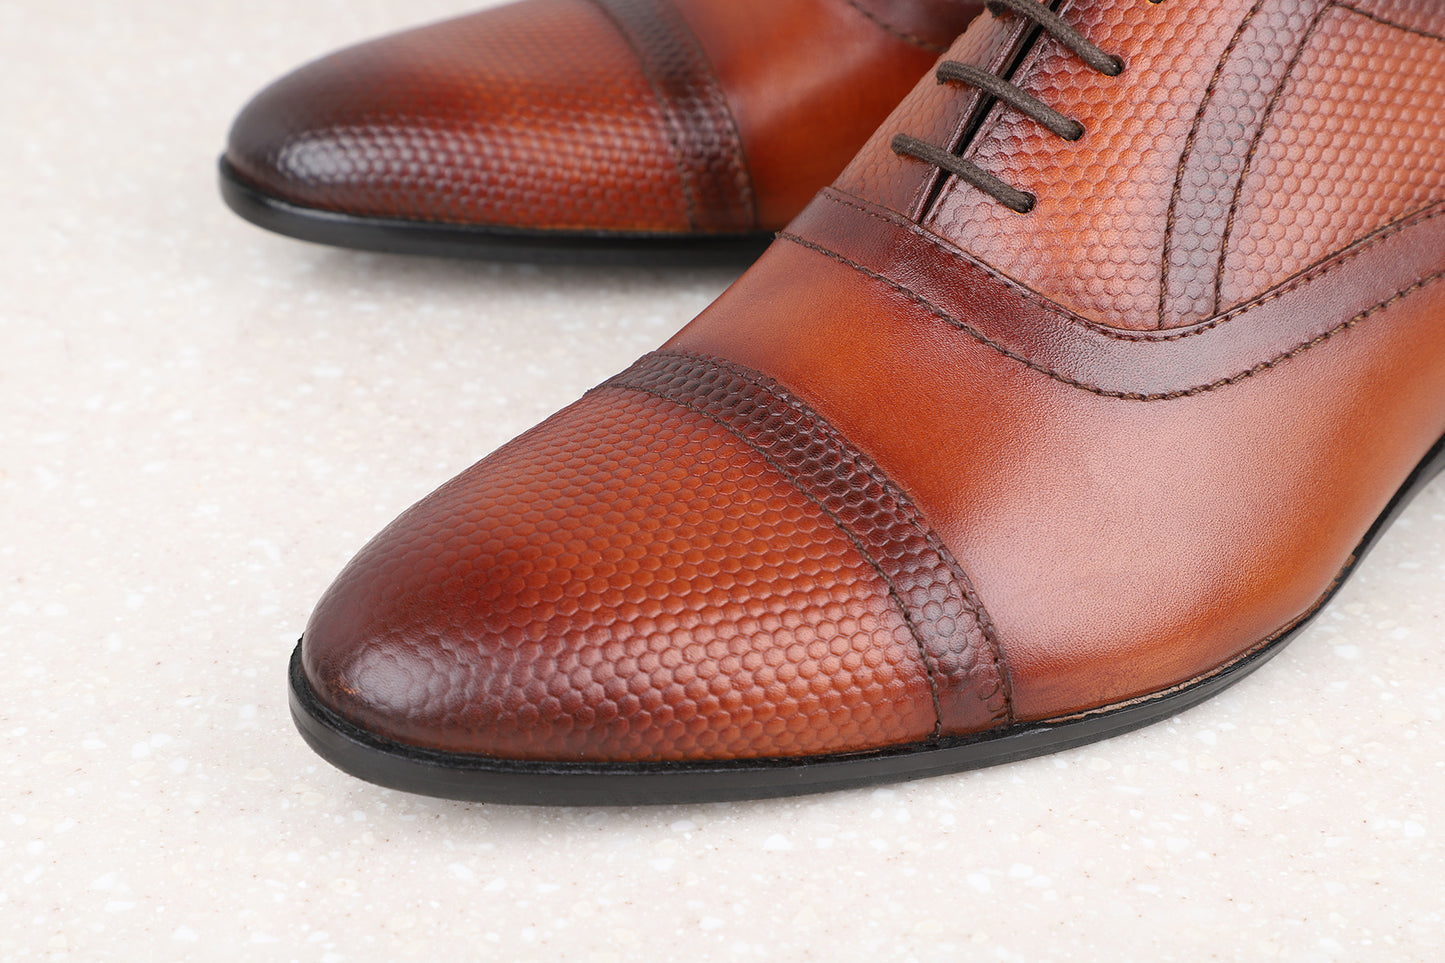 Formal Lace-Up Shoes-Tan